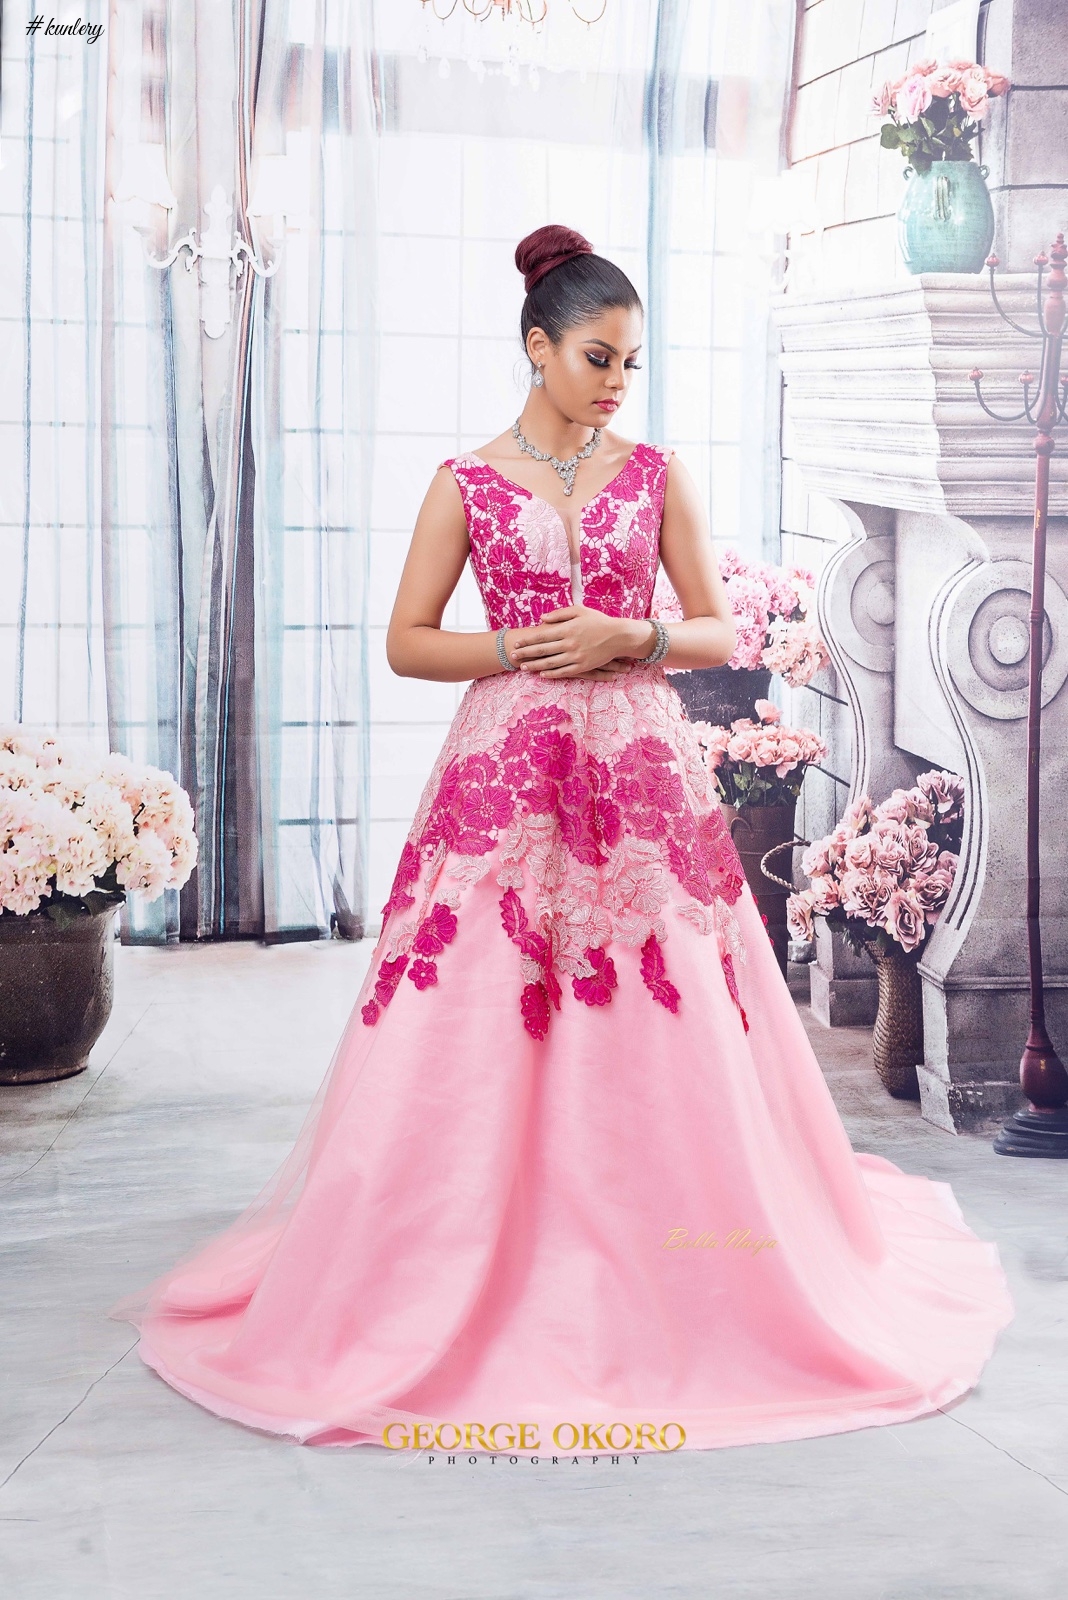 Gimbiyya Atelier Unveils It’s First Bridal Collection For the Beautiful Yet Nontraditional Bride